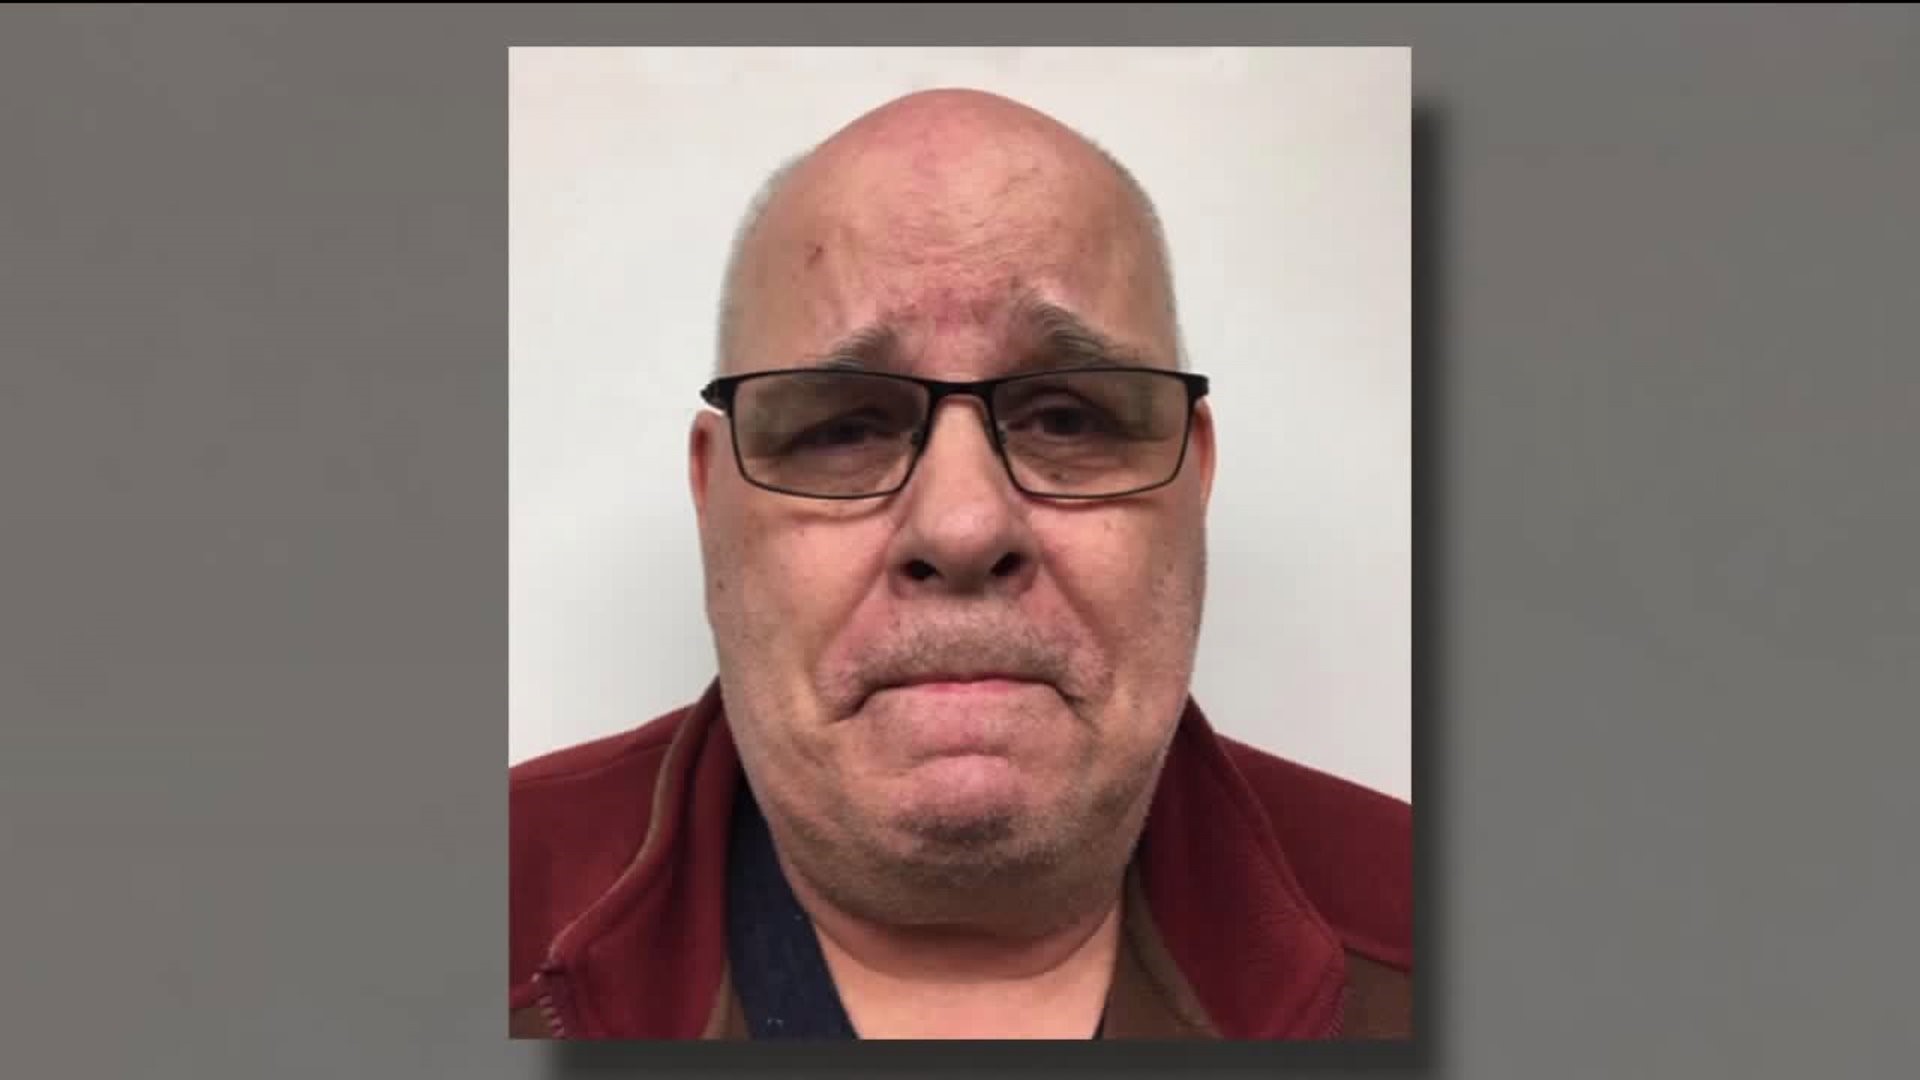 Middle School Basketball Coach, Retired Teacher Faces Child Porn Charges